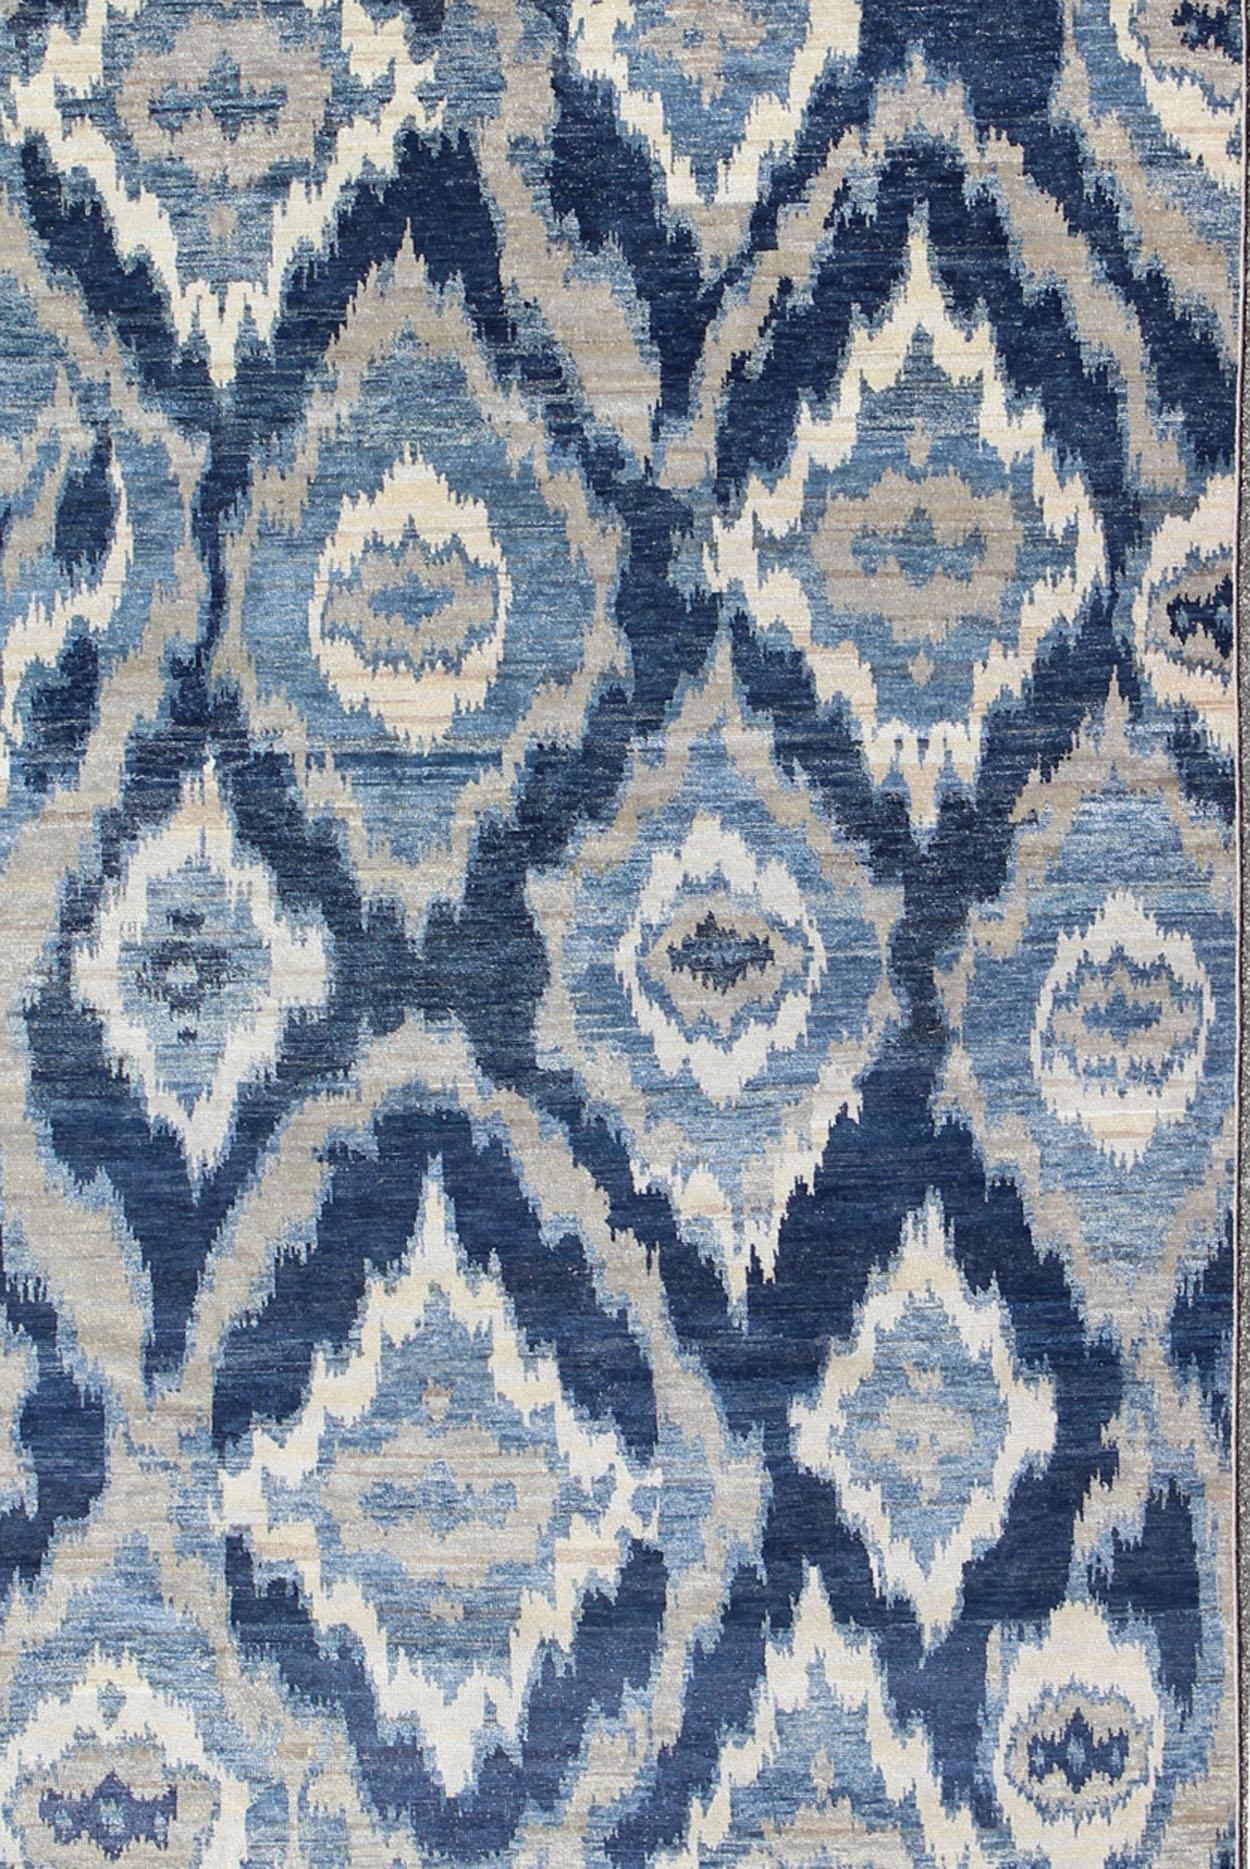  Large Modern Ikat Fine Rug With All-Over Geometrics in Blue, Taupe and Ivory  This Modern Ikat Rug with beautiful design in navy, and taupe colors is well suited for contemporary setting as well as any transitional room.

 Measures: 10'0 x 14'0. 

